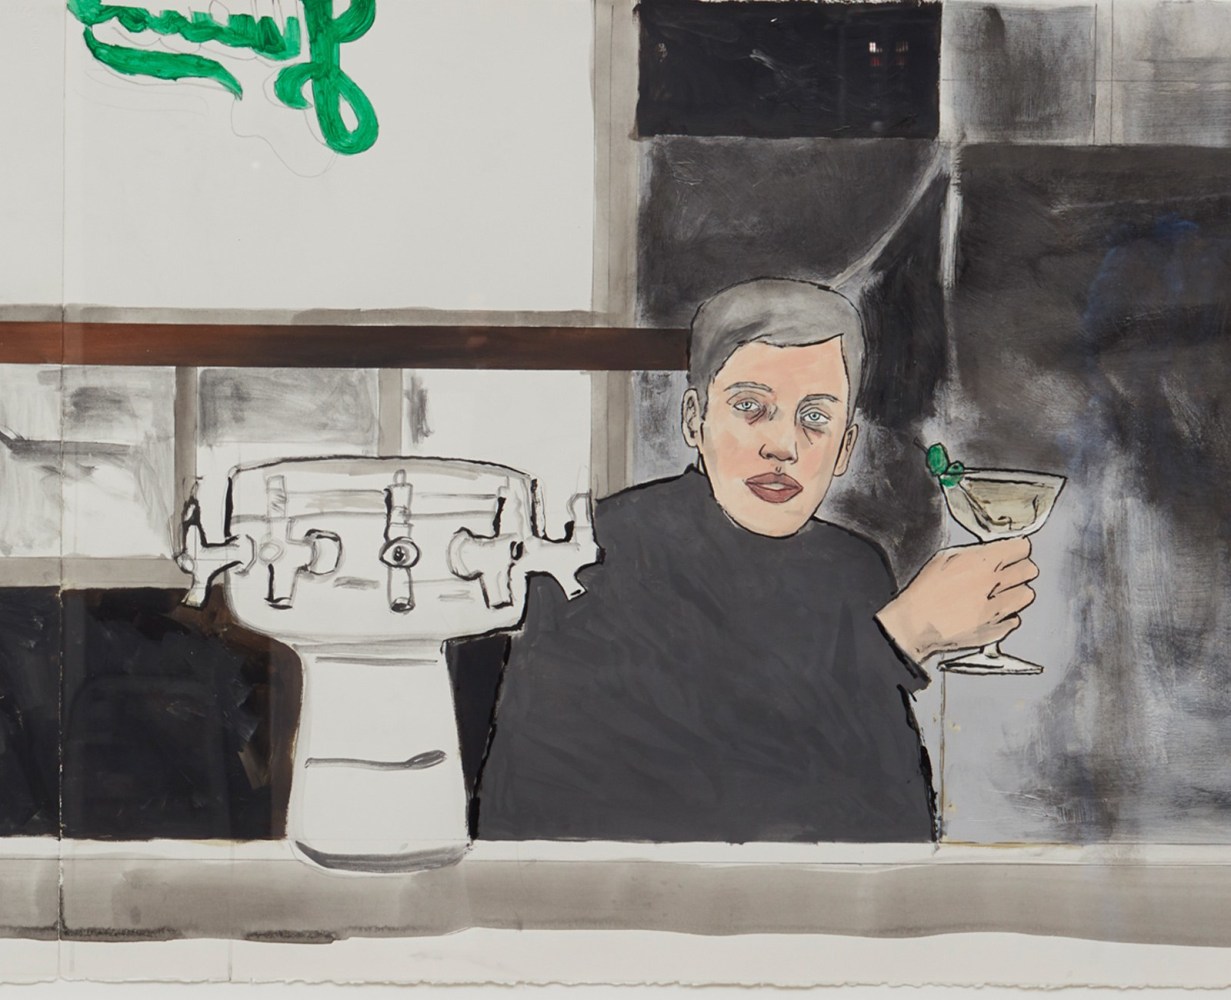 HERNAN BAS

Sip In (final grouping), 2019 (detail)

Acrylic, charcoal, and graphite on paper

26 x 80.5 inches (paper)

66 x 204.5 cm

29.5 x 84 x 2 inches (framed)

74.9 x 213.4 x 5.1 cm